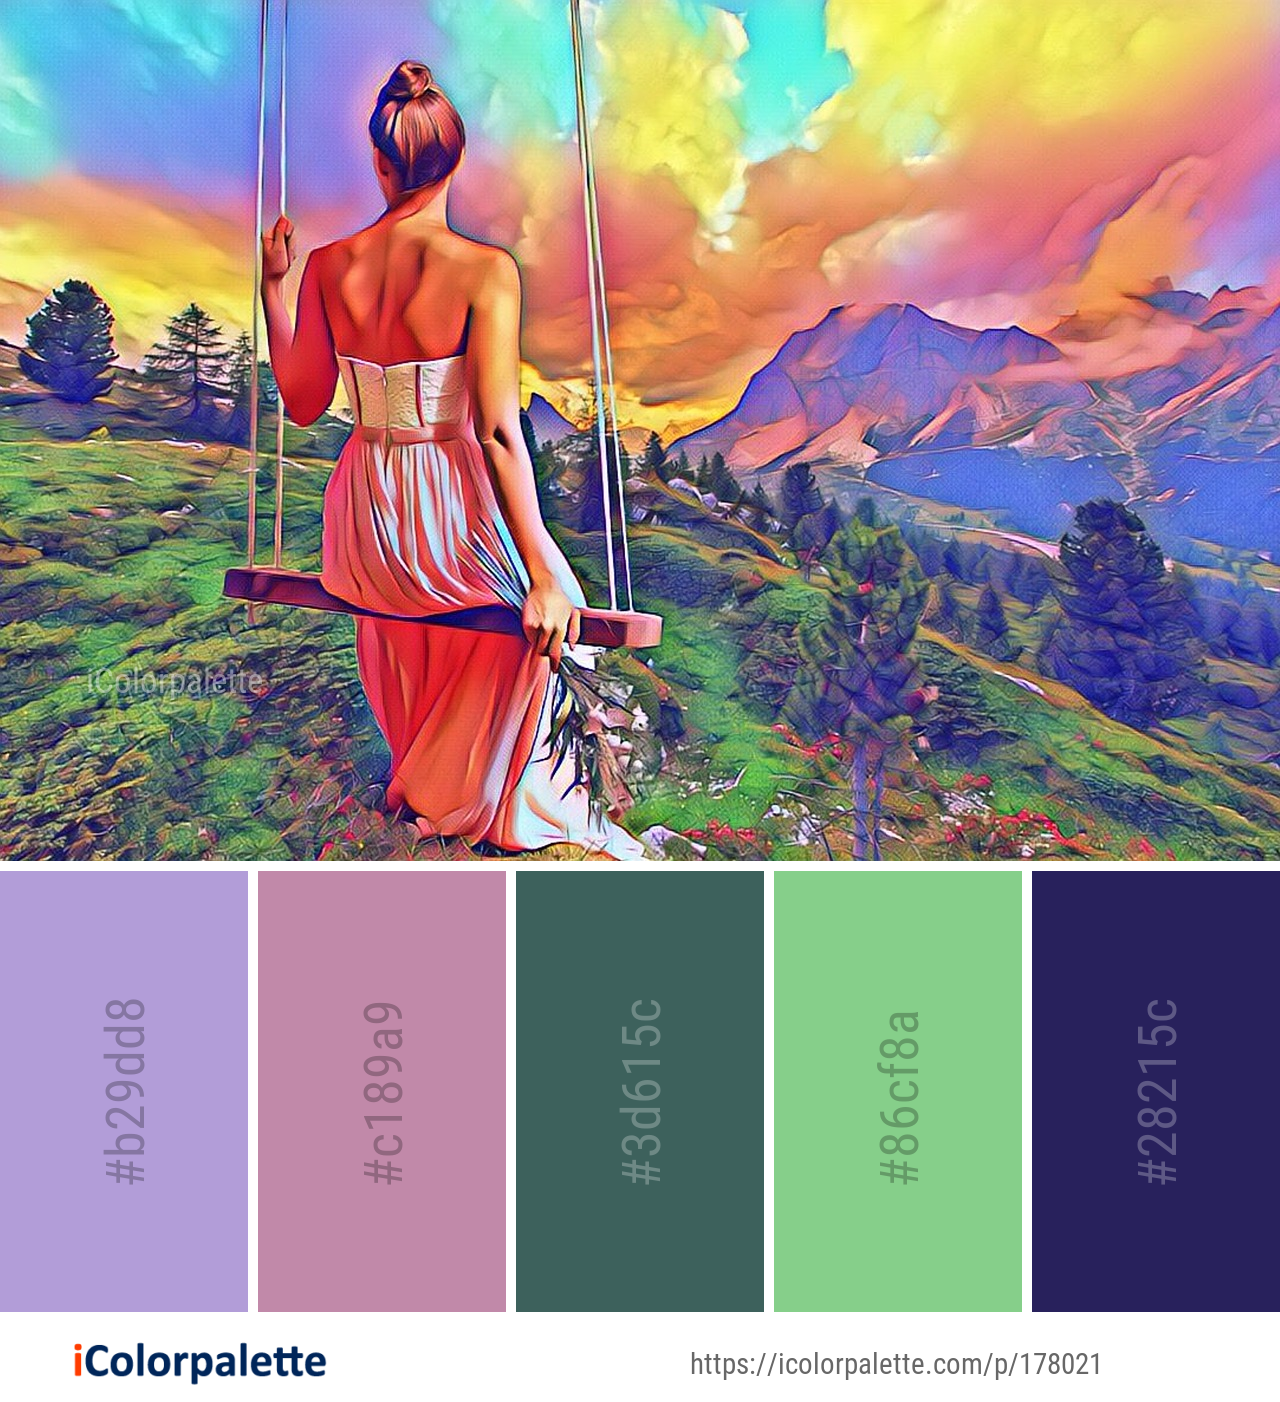 Color Palette Ideas from Art Sky Painting Image | iColorpalette